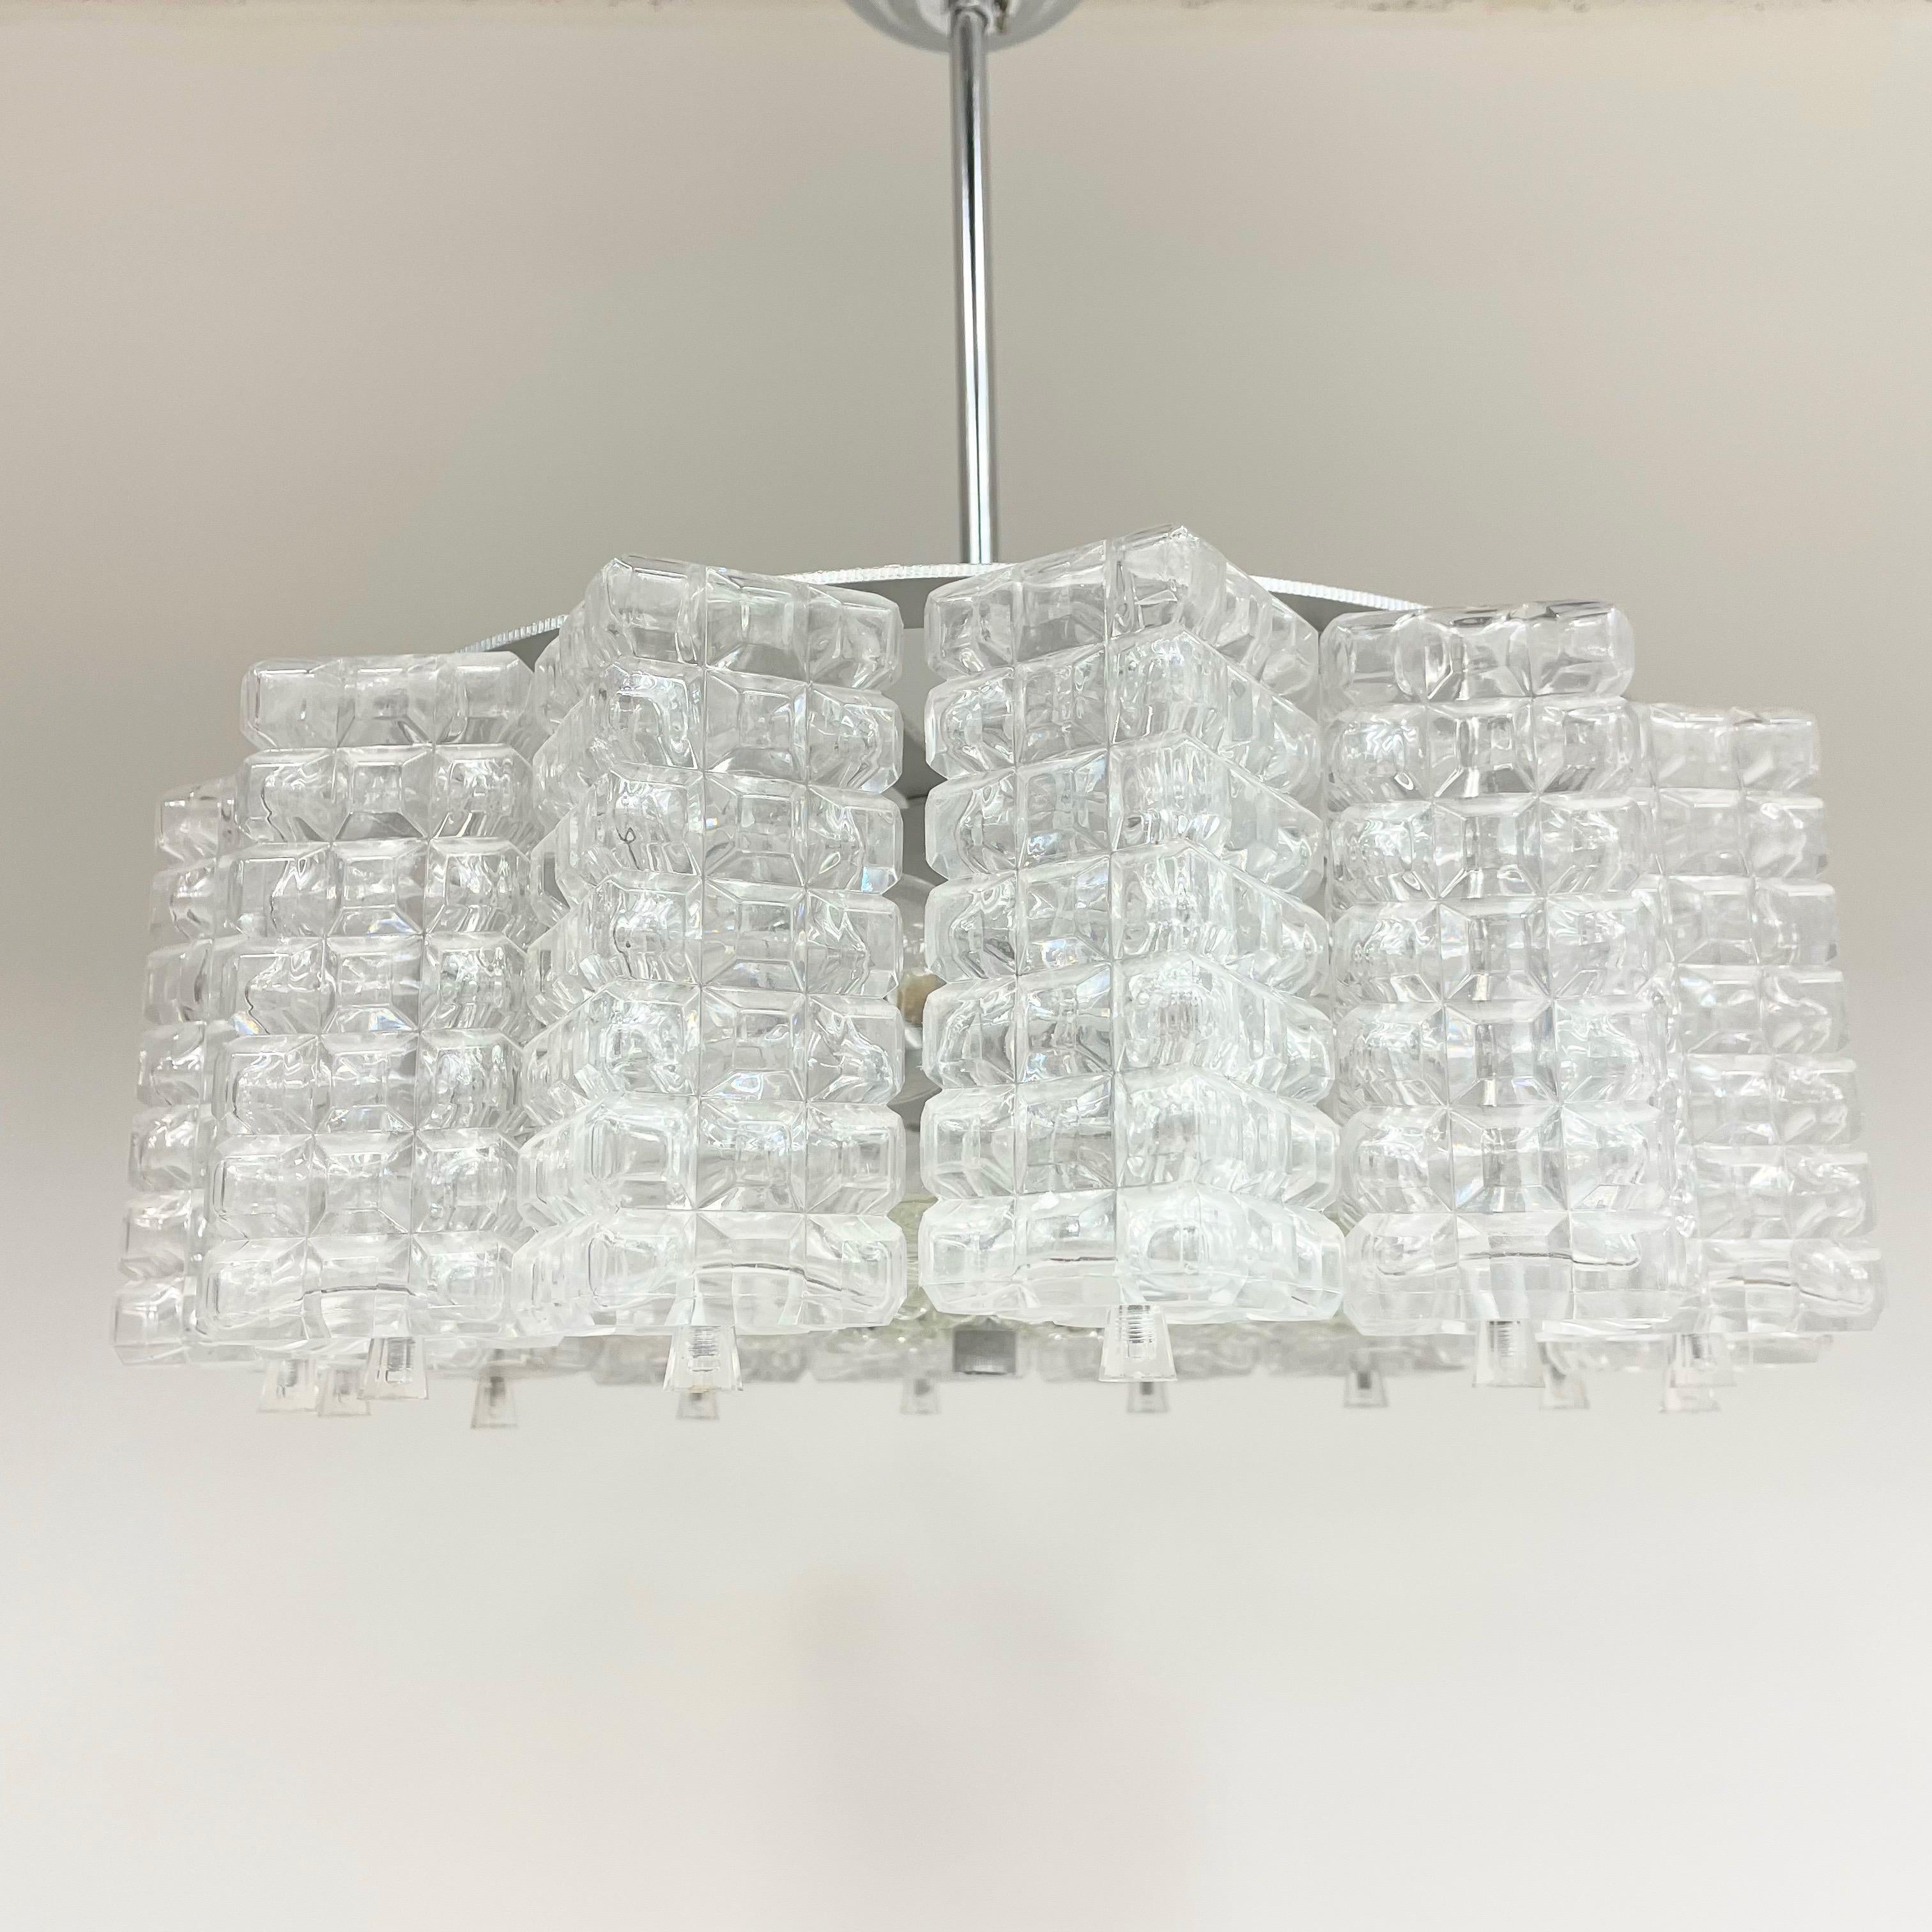 Beautiful and rare chandelier or pendant light by Austrolux. An original mid-century vintage piece manufactured in the 1960s. It is made of metal, a blown glass played and depression glass cubes / Quarters. The Fixture requires 5 European E14 / 110